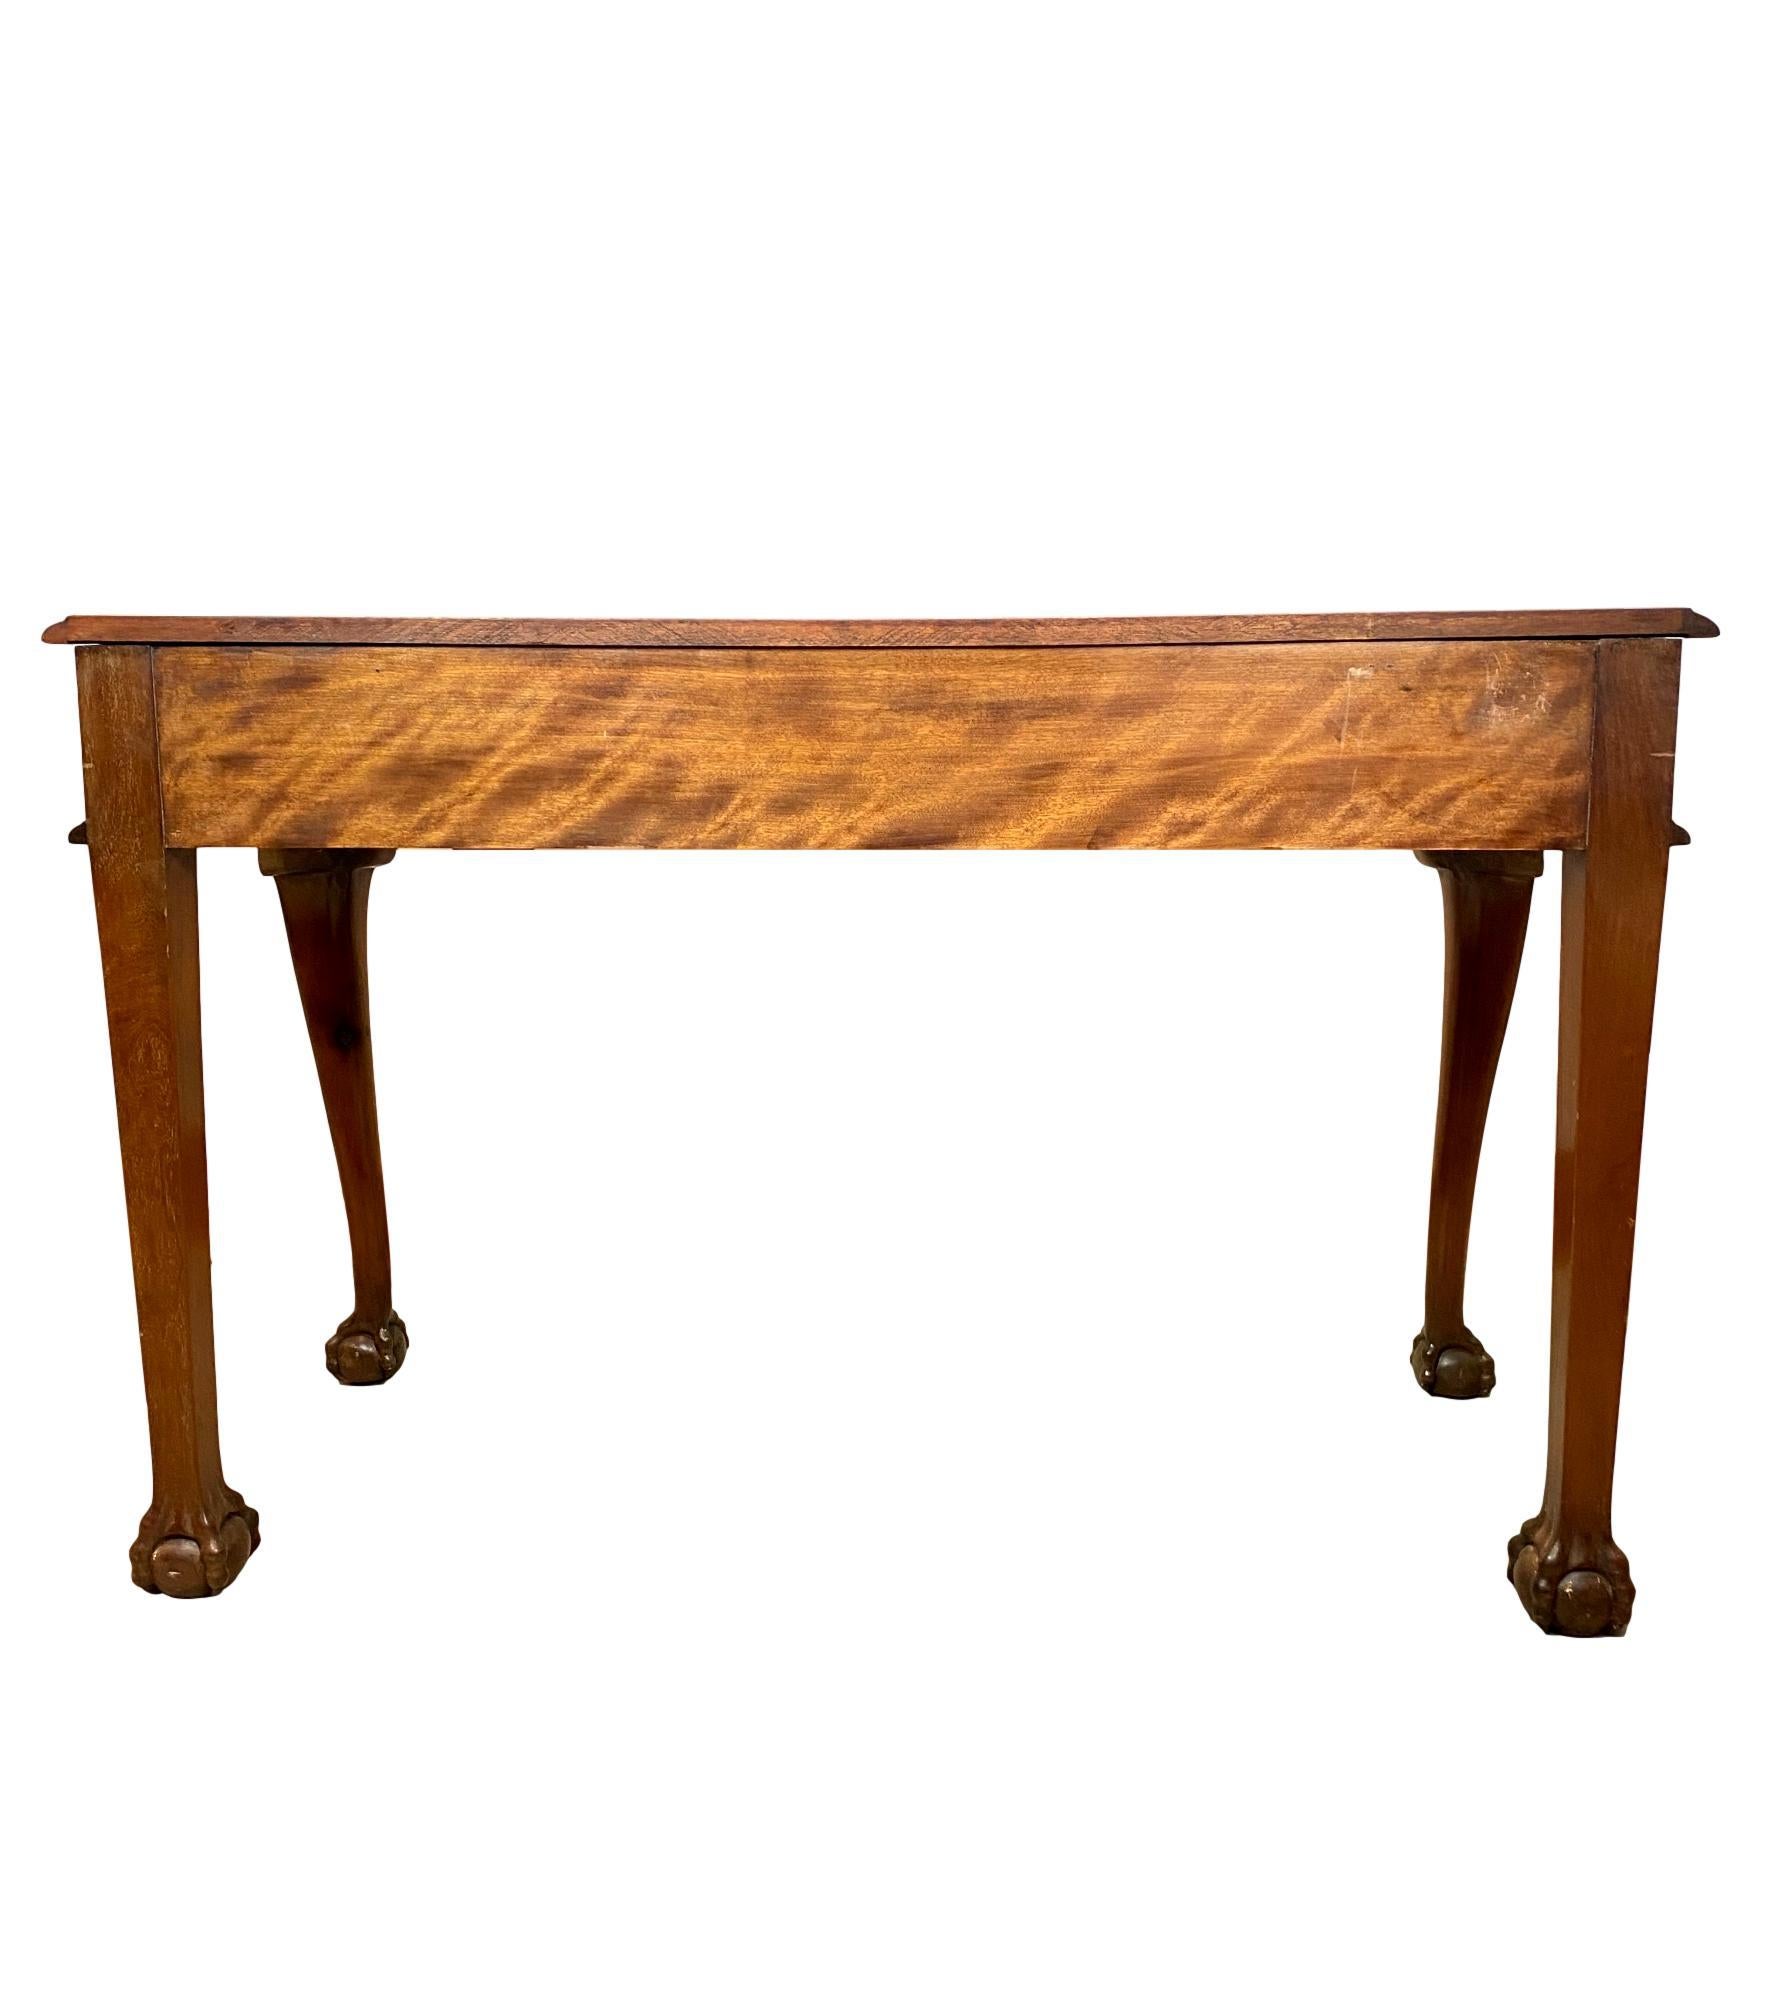 19th Century Chippendale Revival Mahogany Three-Drawer Console Table, English, circa 1880 For Sale